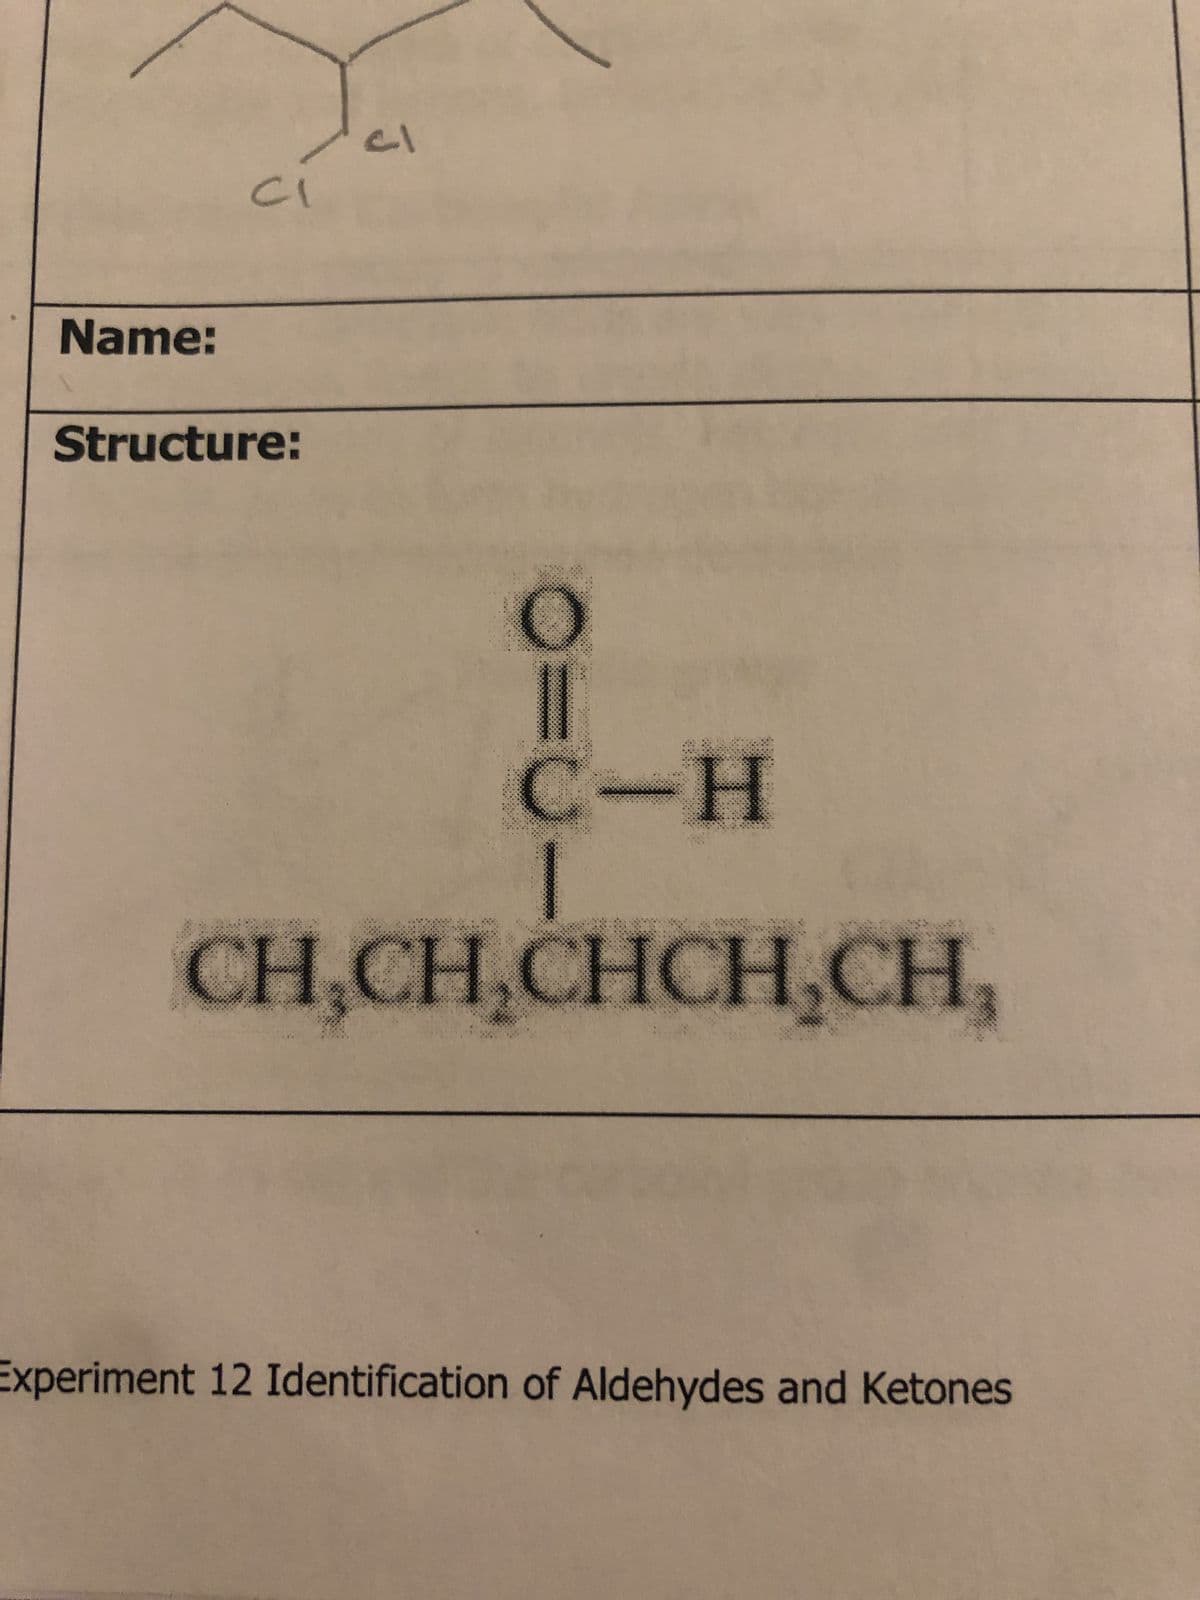 Name:
cí
Structure:
J
0=
C-H
CH₂CH₂CHCH₂CH₂
Experiment 12 Identification of Aldehydes and Ketones